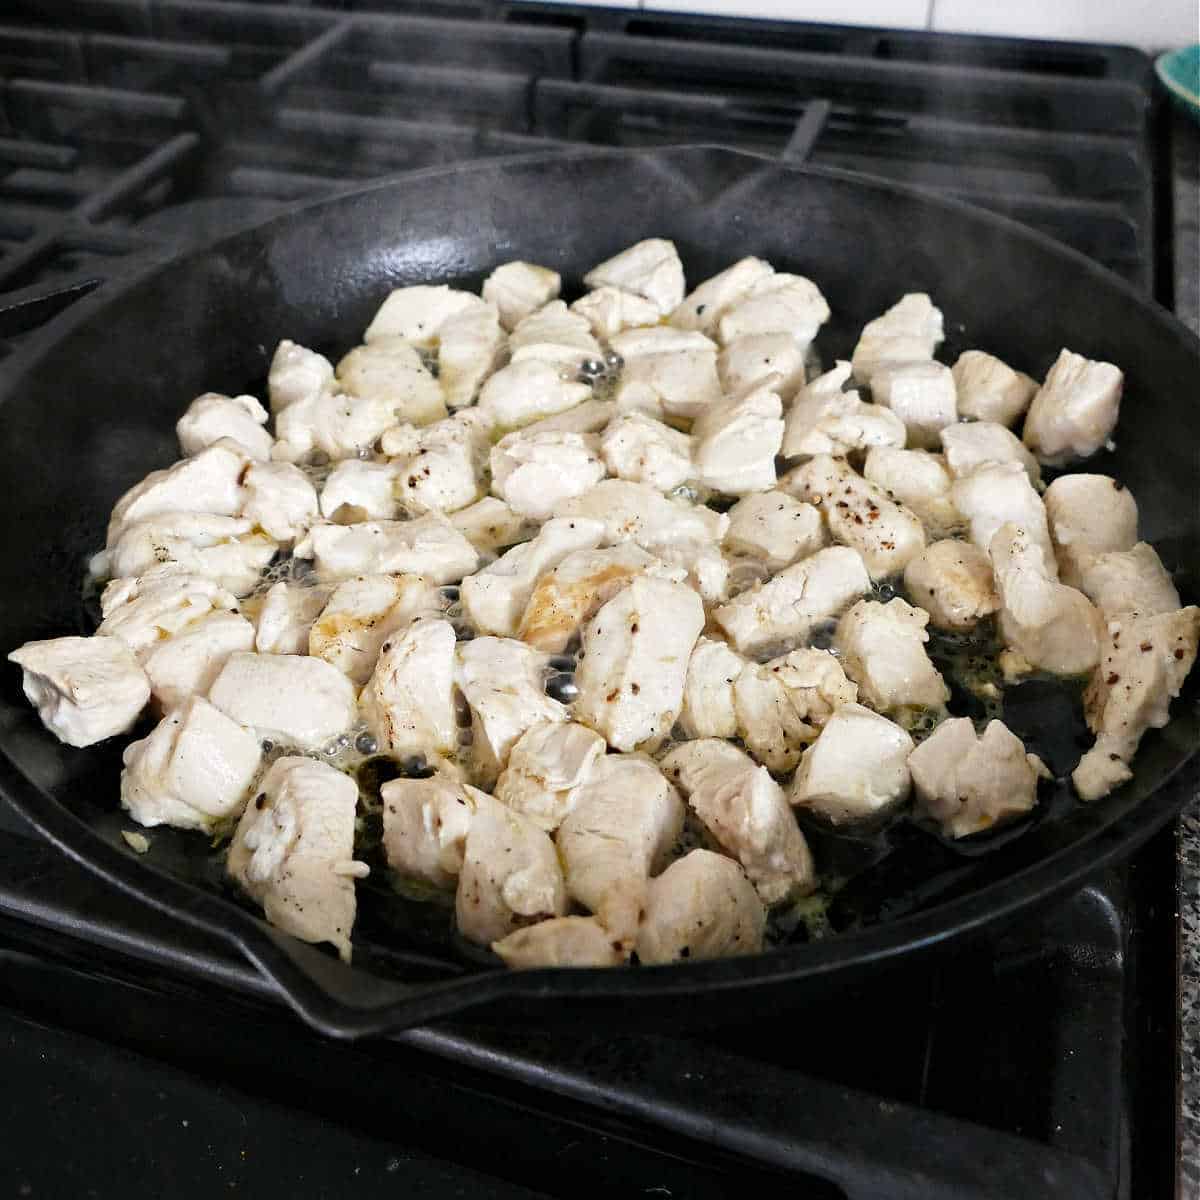 diced chicken cooking in a cast iron skillet on the stove